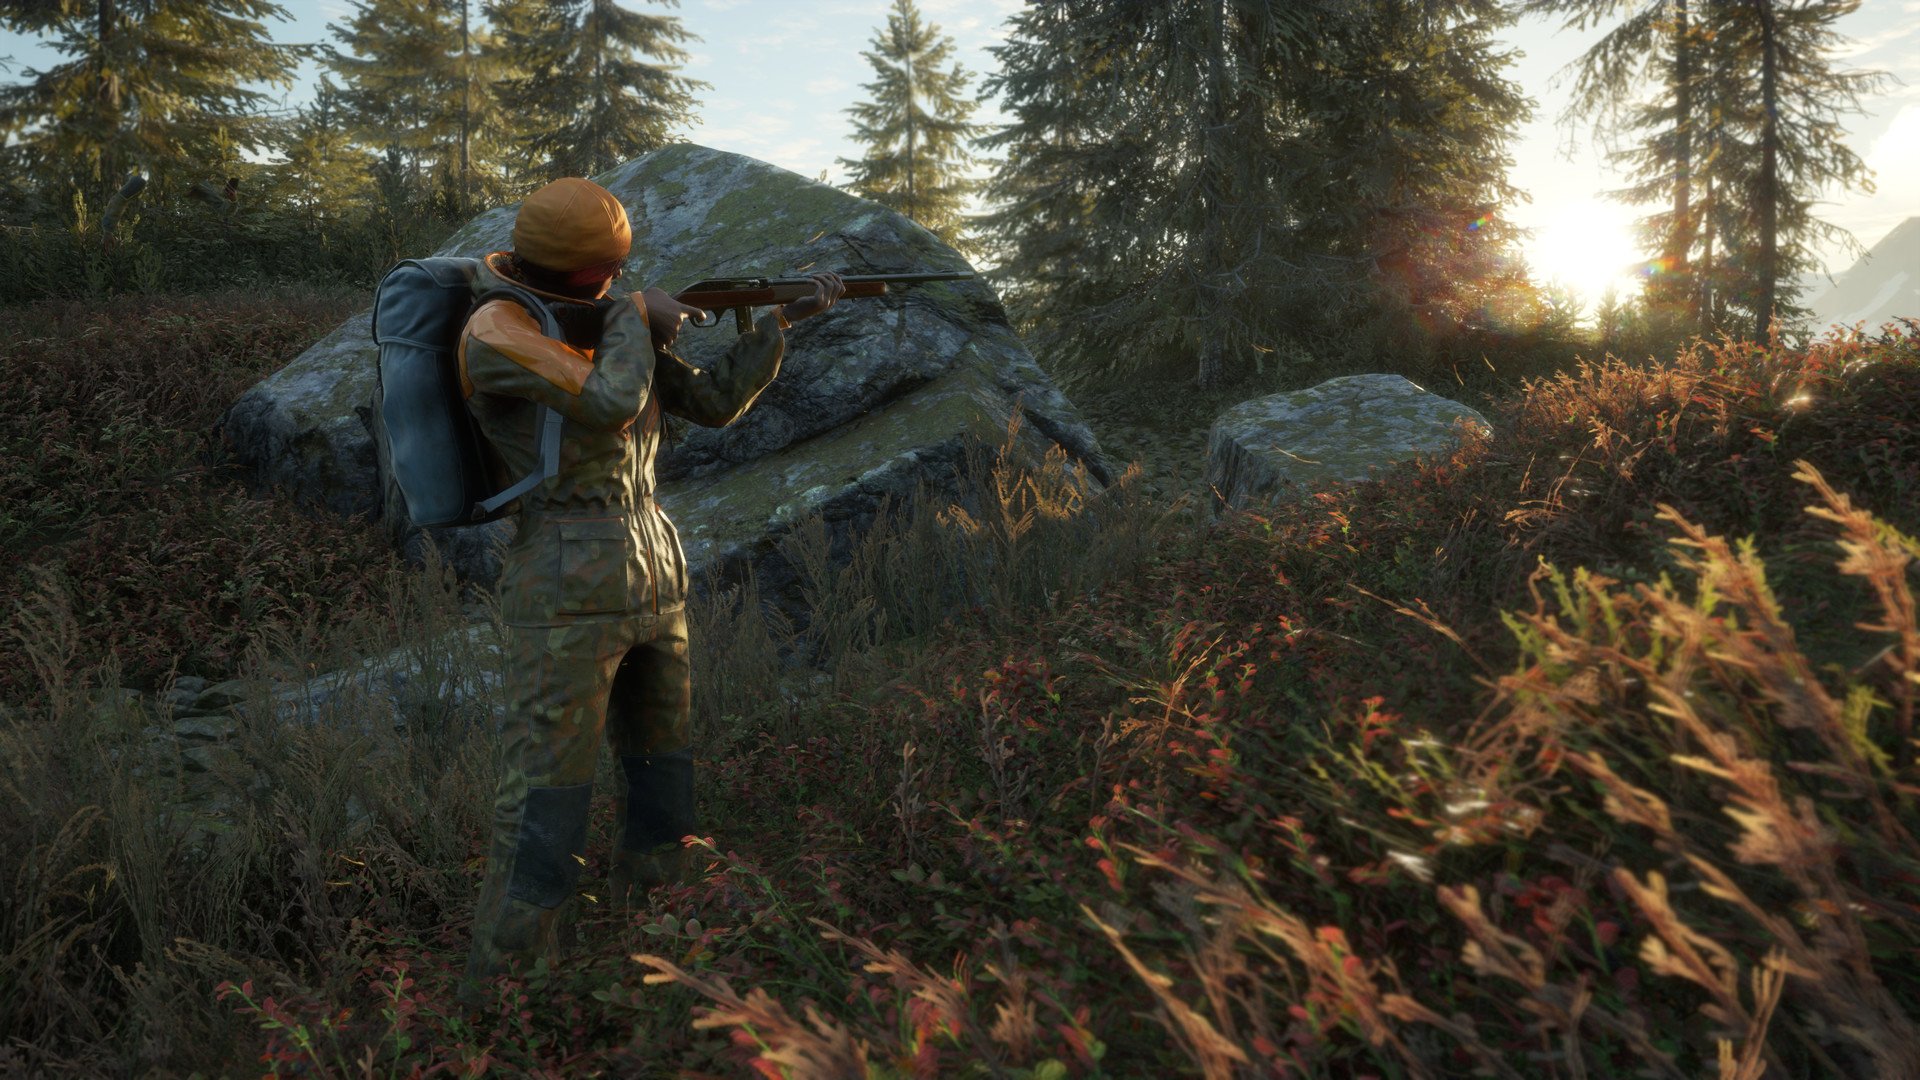 theHunter Call of the Wild Weapon Pack 1 1